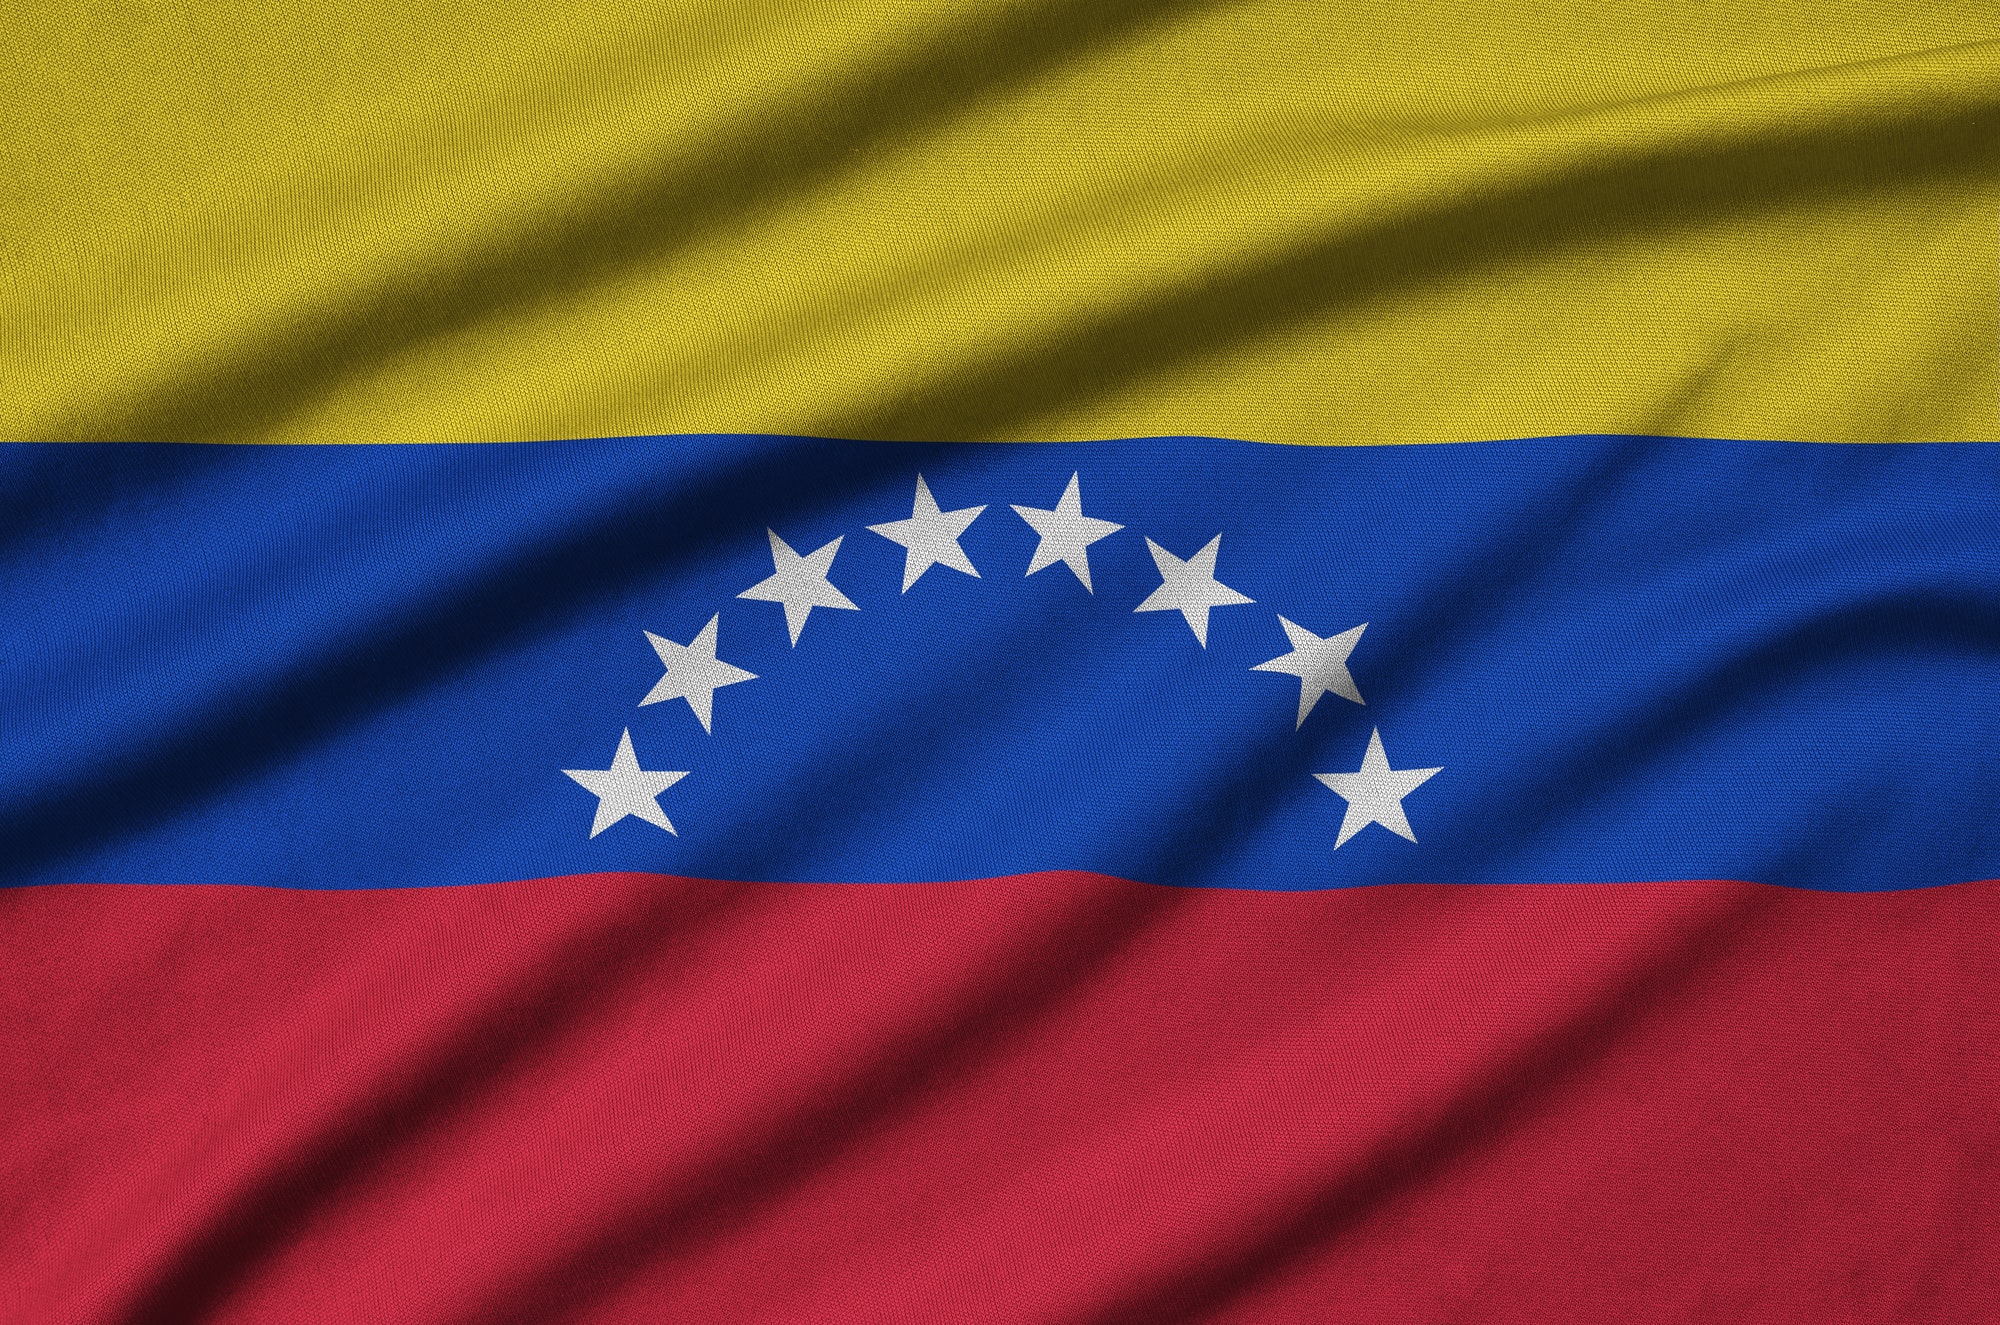 Venezuela flag is depicted on a sports cloth fabric with many folds. Sport team waving banner